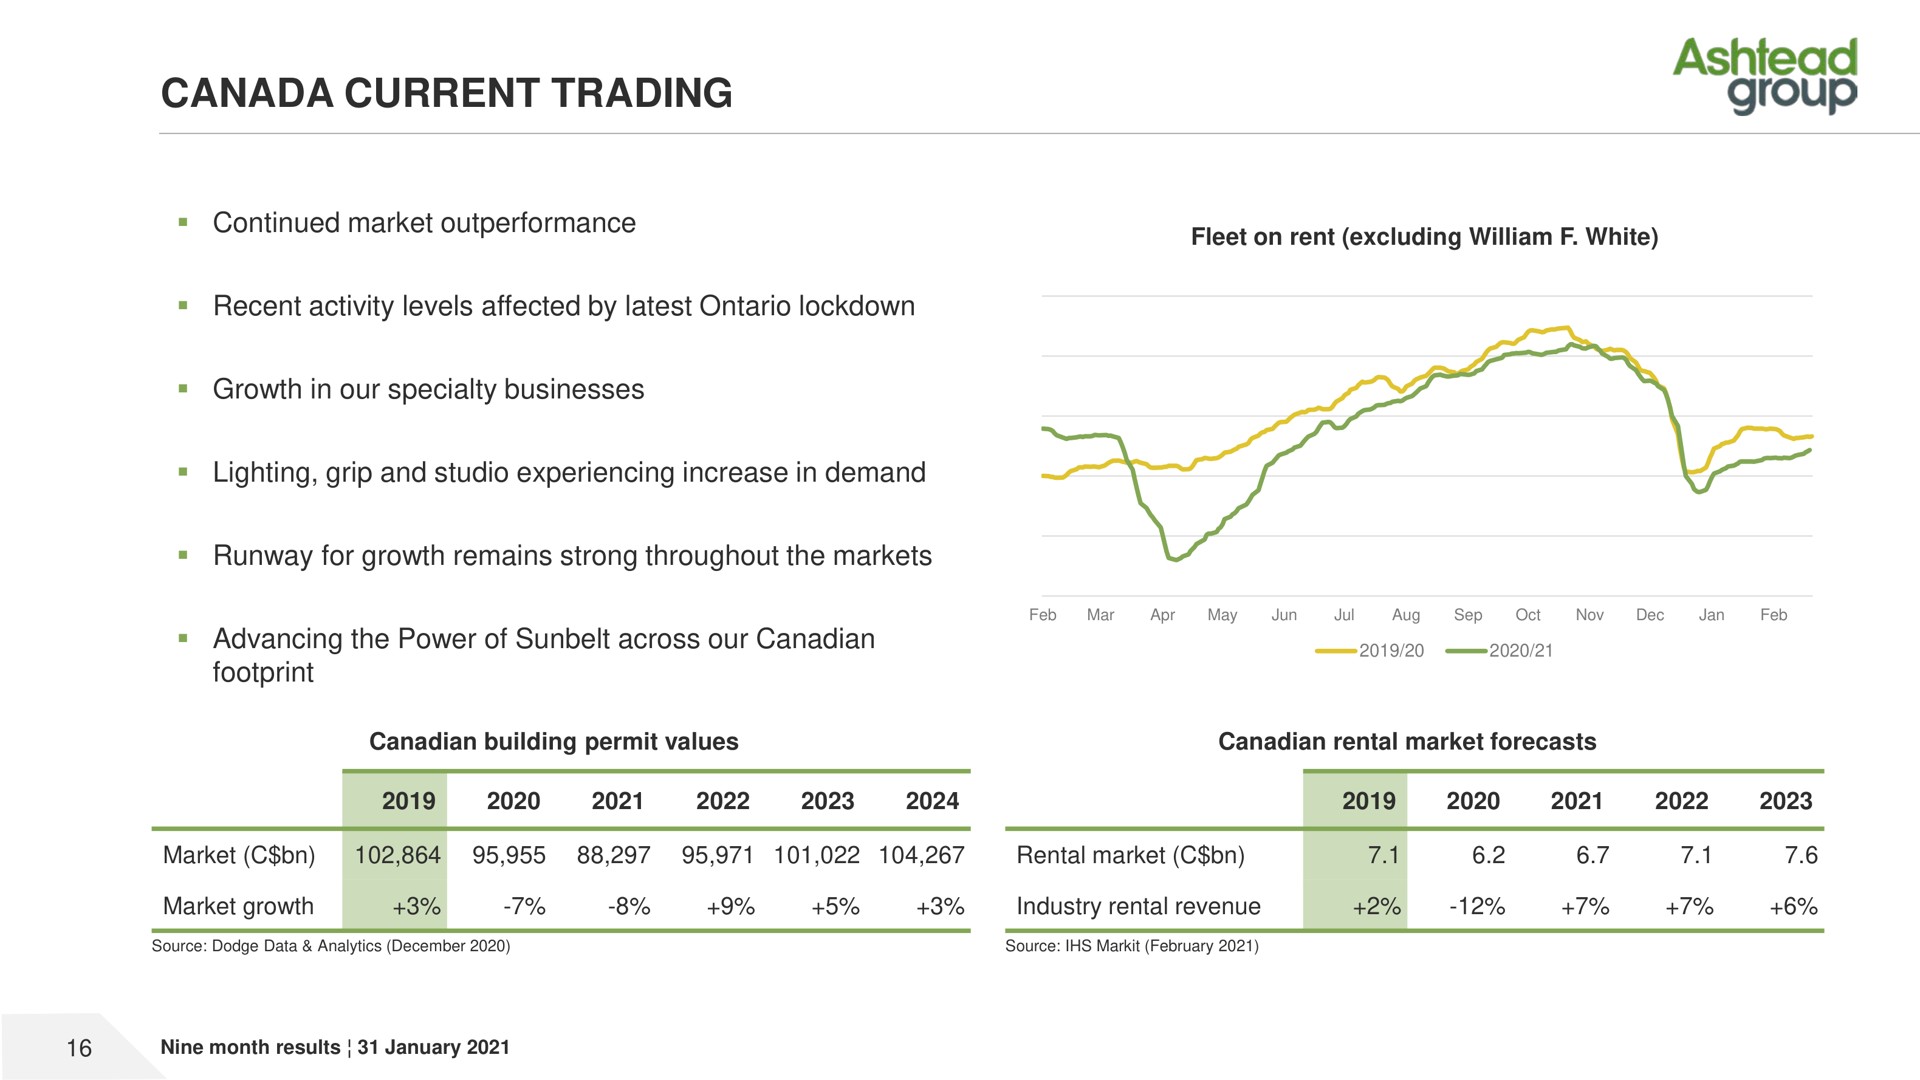 canada current trading group | Ashtead Group